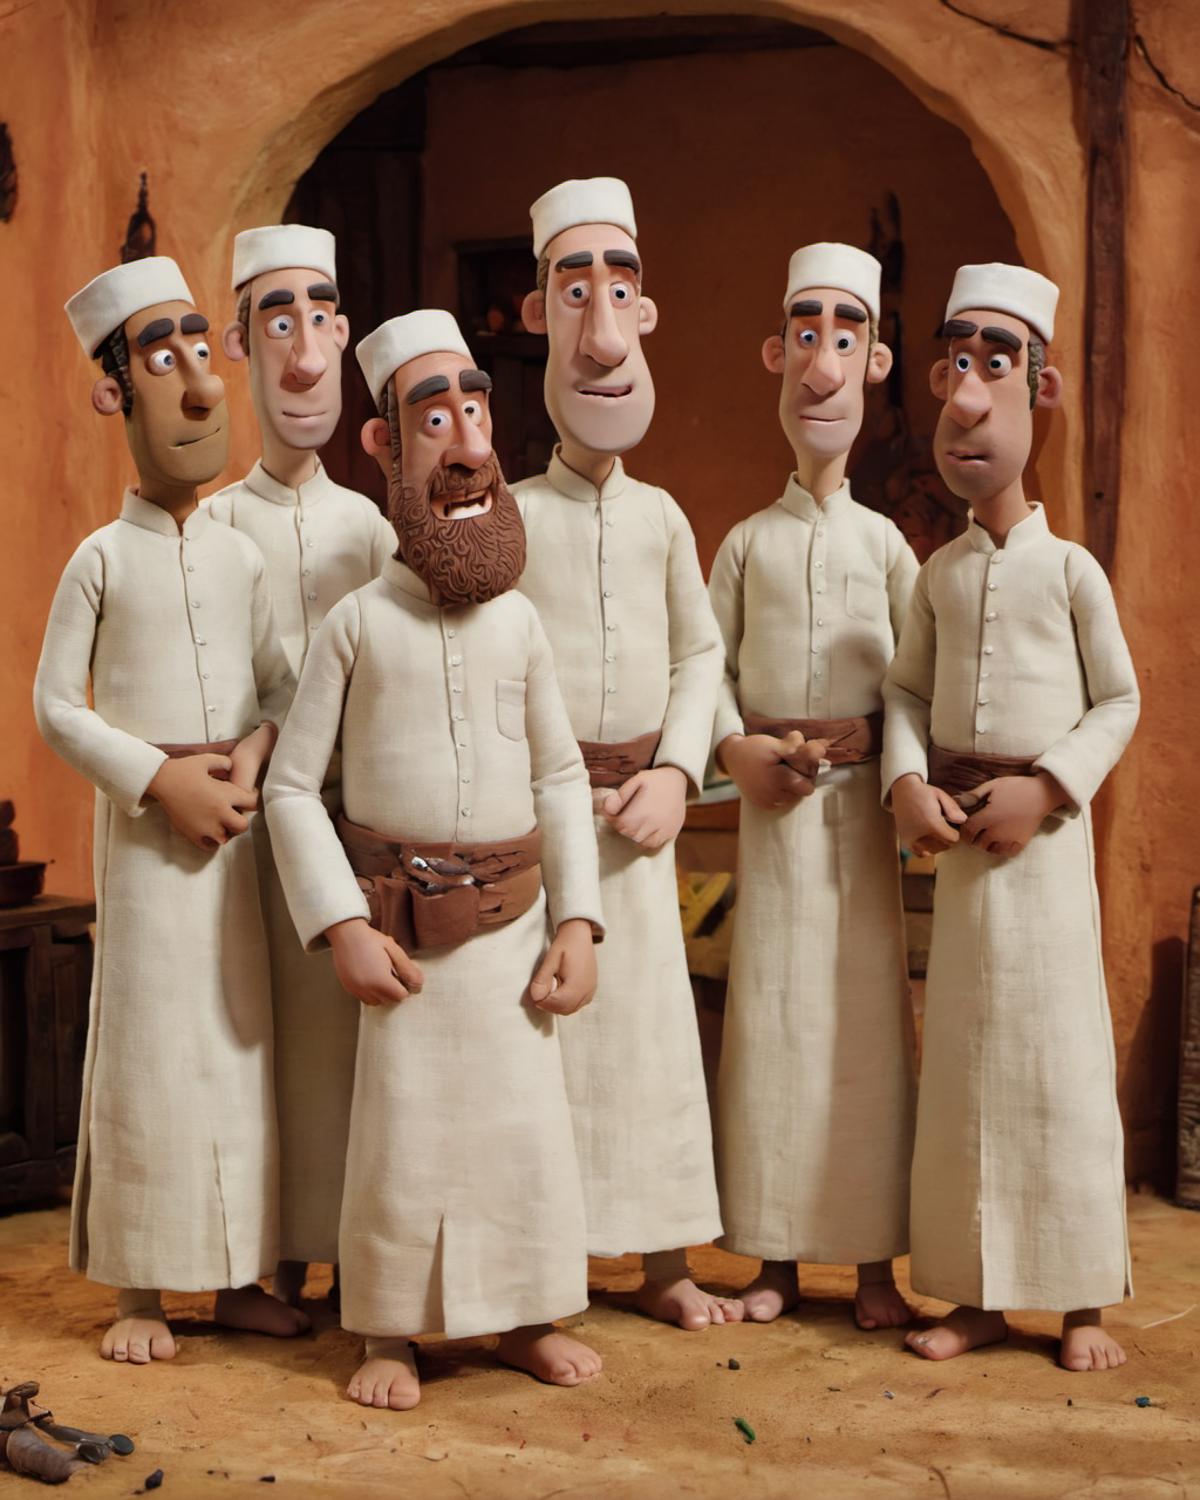 A group of cartoonish bearded men wearing white robes and belts.